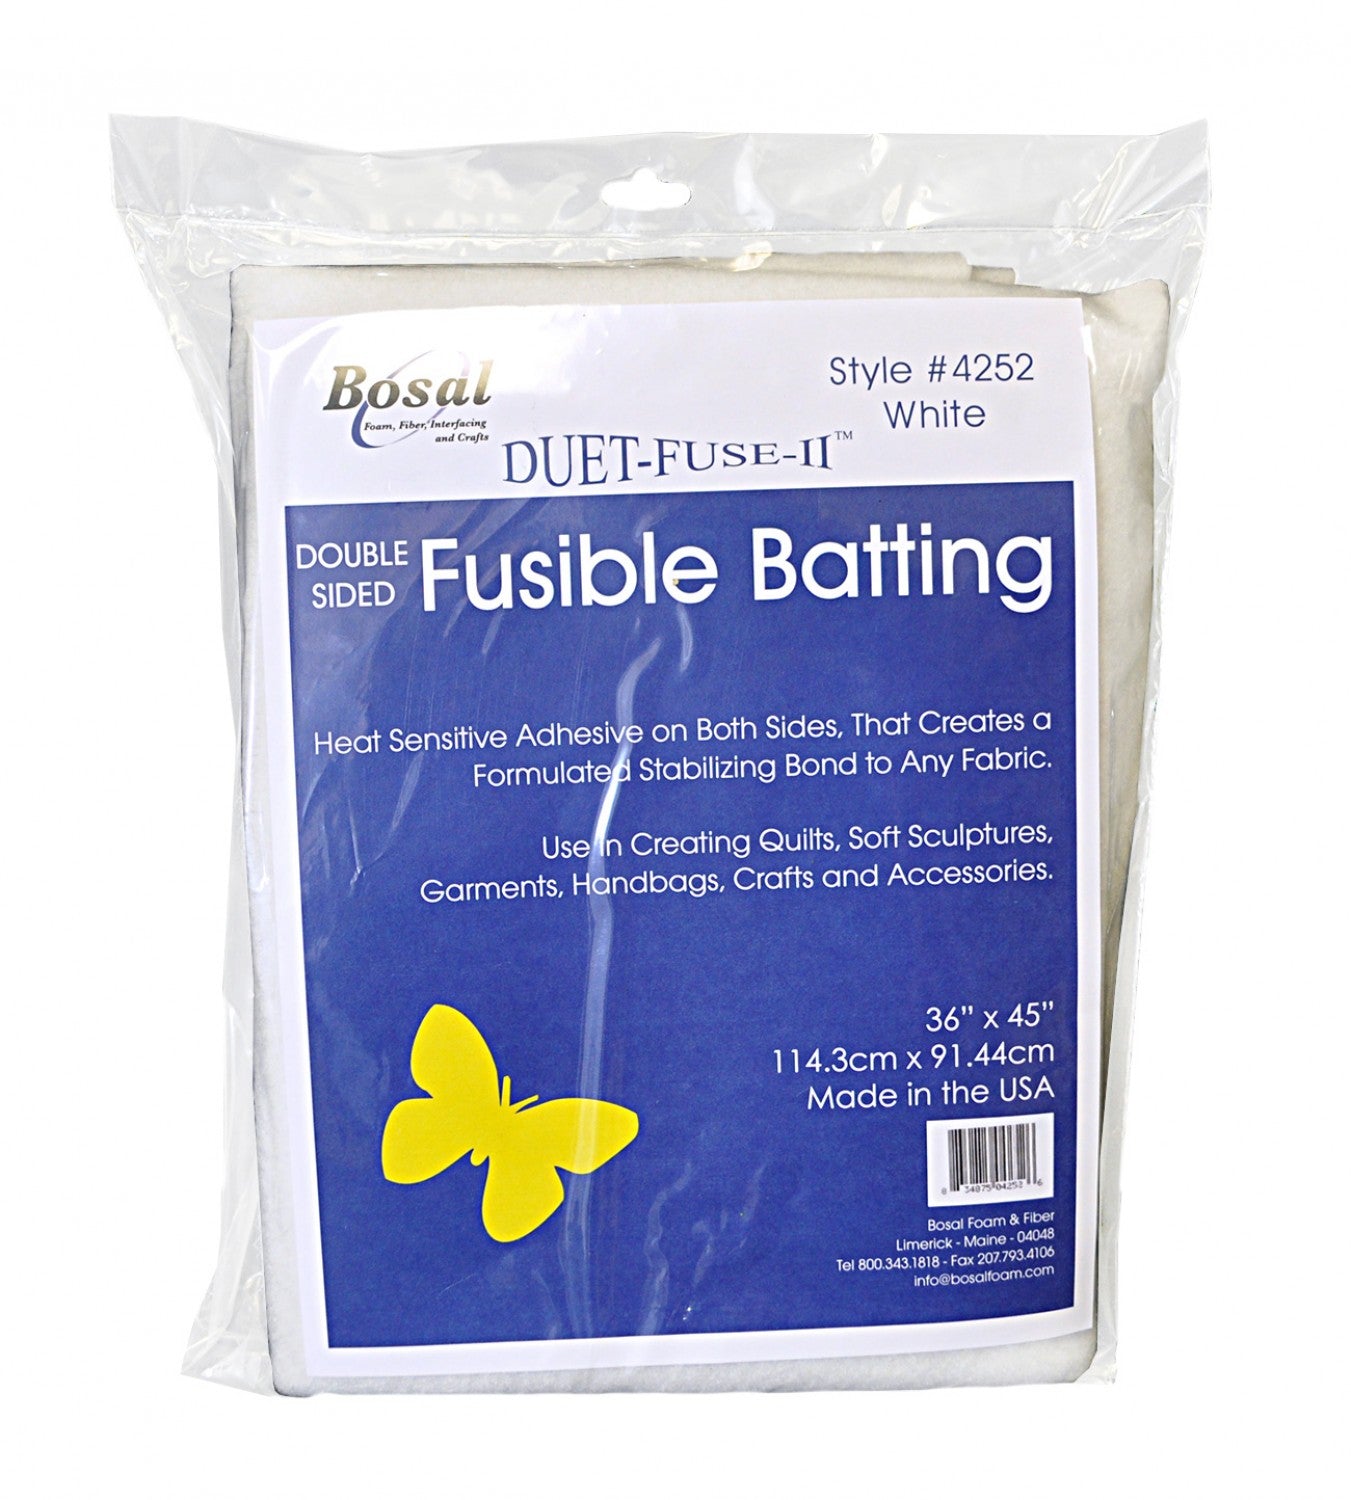 Duet Fuse II Double-Sided Fusible Batting 45-Inches x 36-Inches by Bosal Foam and Fiber